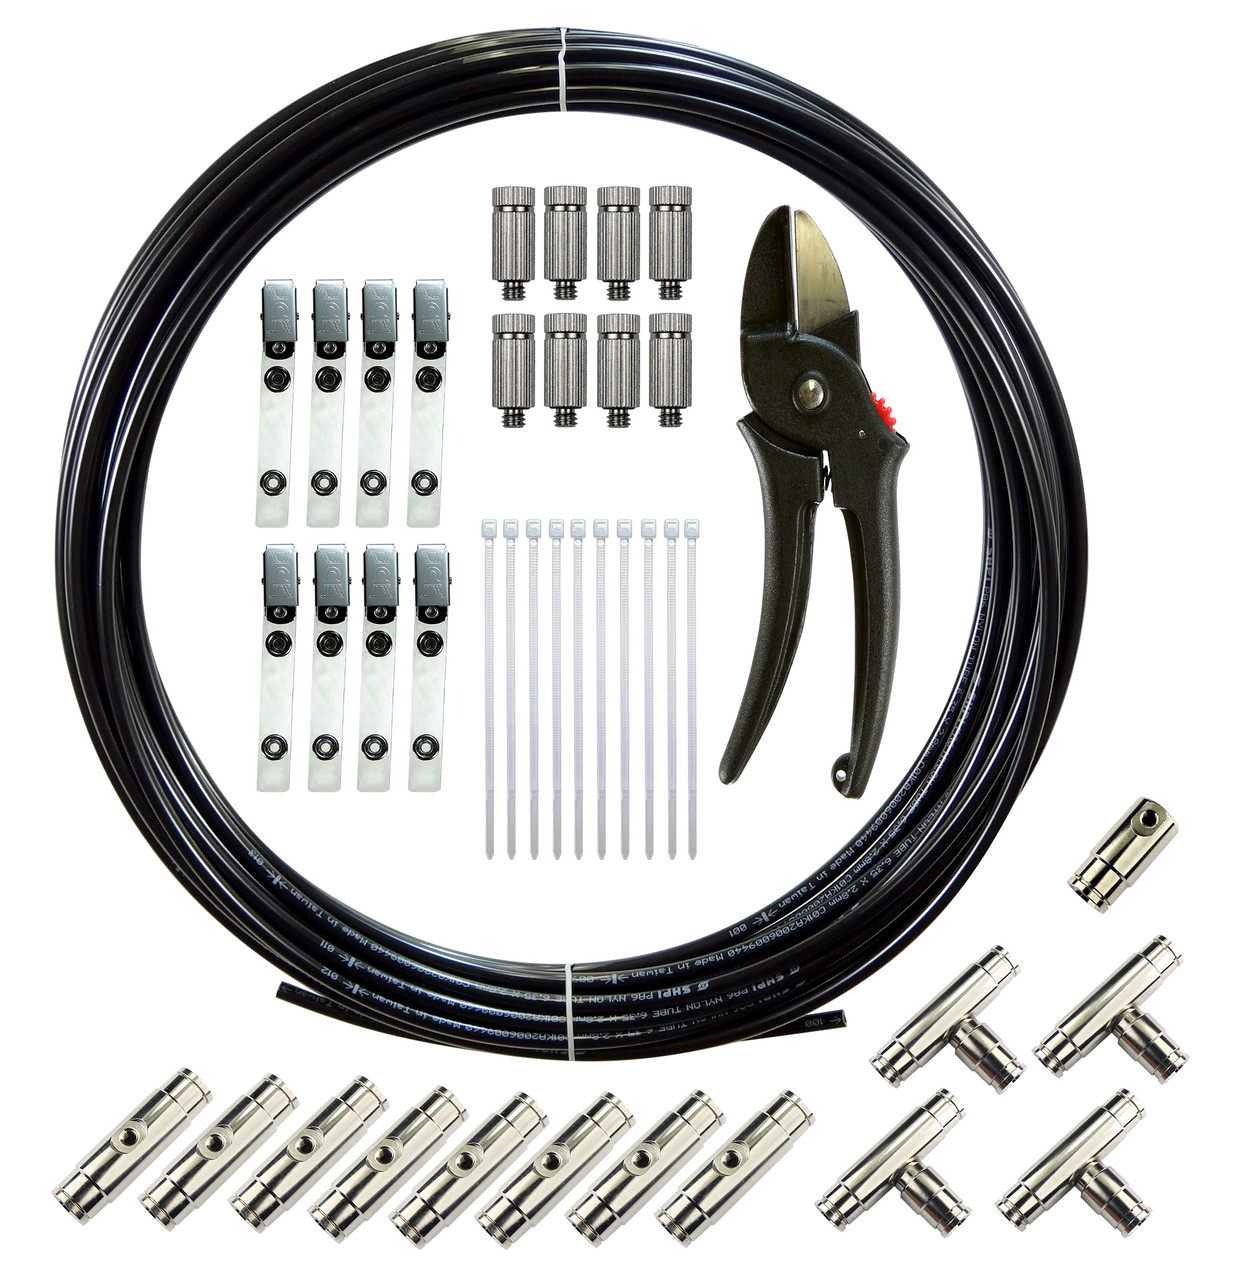 8 Nozzle Line Kit
Create your own 
misting line with this 
kit. 1/4ʺ High Pressure 
Nylon Hose with 8 
Nozzles.